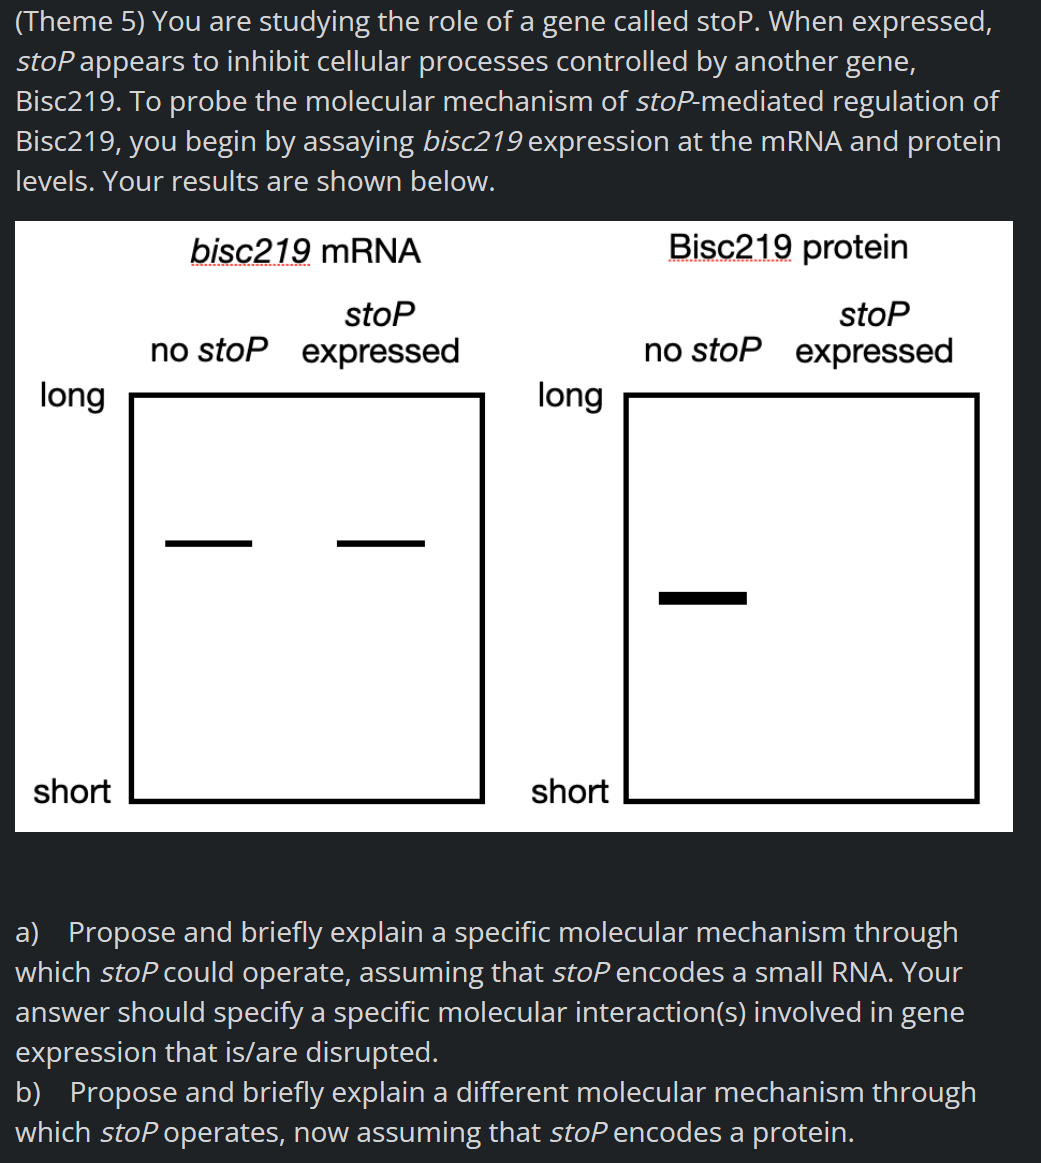 (Theme 5) You are studying the role of a gene called stop. When expressed,
stop appears to inhibit cellular processes controlled by another gene,
Bisc219. To probe the molecular mechanism of stoP-mediated regulation of
Bisc219, you begin by assaying bisc219 expression at the mRNA and protein
levels. Your results are shown below.
long
short
bisc219 mRNA
stop
no stop expressed
long
short
Bisc219 protein
stop
no stop expressed
a) Propose and briefly explain a specific molecular mechanism through
which stop could operate, assuming that stop encodes a small RNA. Your
answer should specify a specific molecular interaction(s) involved in gene
expression that is/are disrupted.
b) Propose and briefly explain a different molecular mechanism through
which stop operates, now assuming that stop encodes a protein.